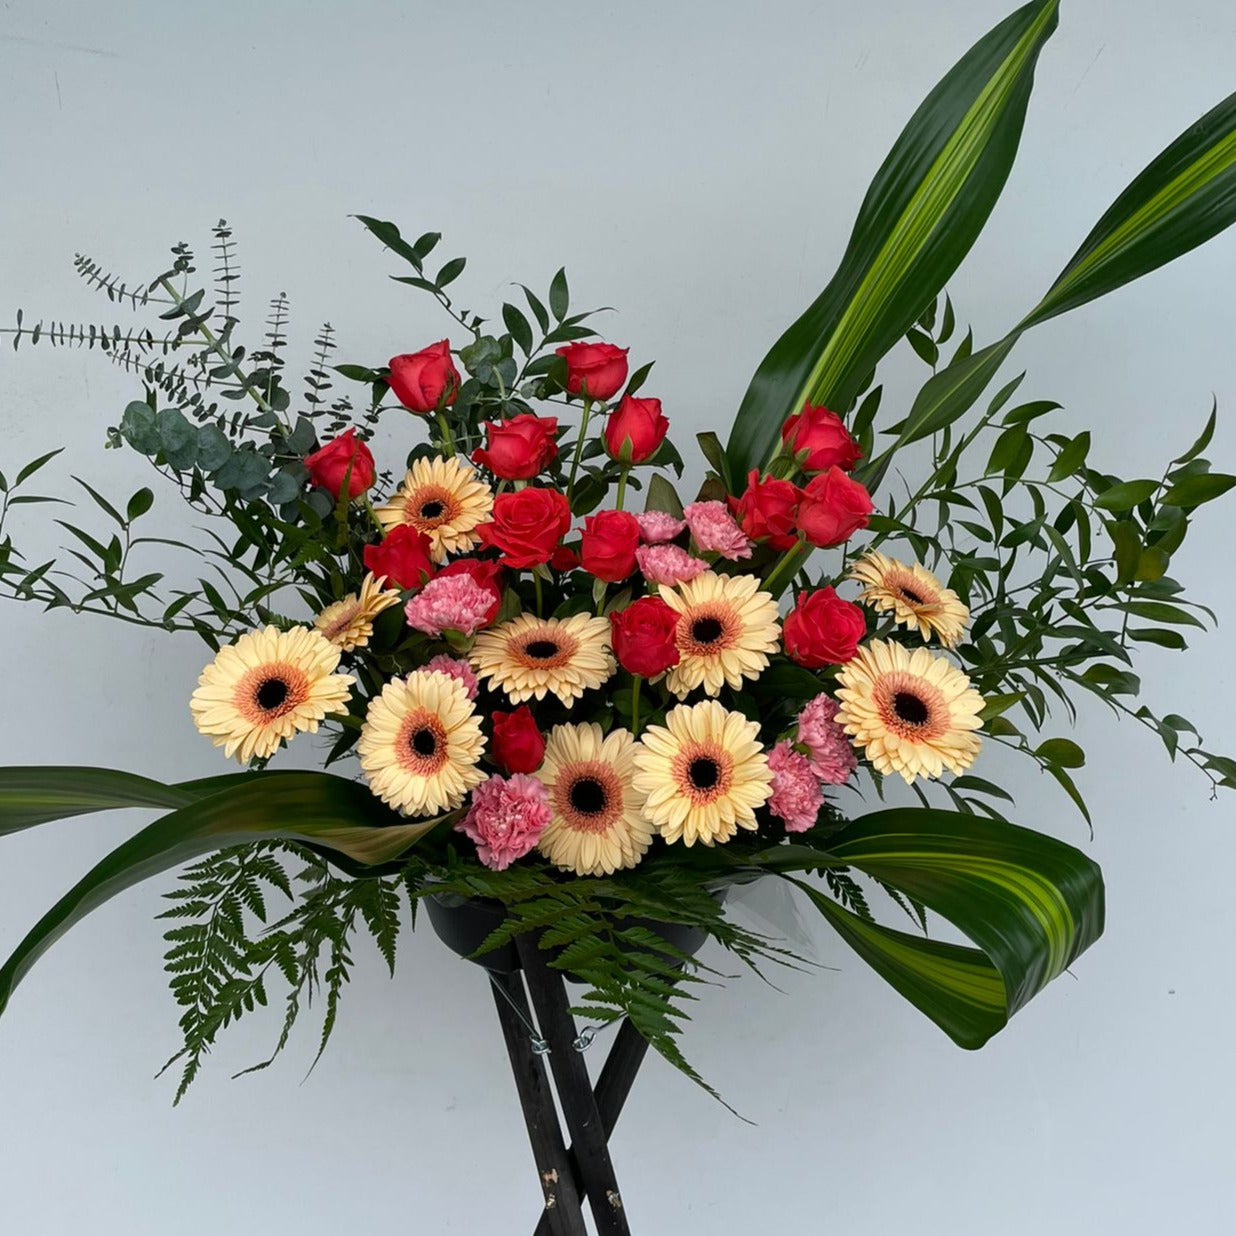 Real Fresh Cheap Fresh Red Roses, Pastel Gerbera Daisies, Carnation Flower Grand Opening Floral Stand Under $200